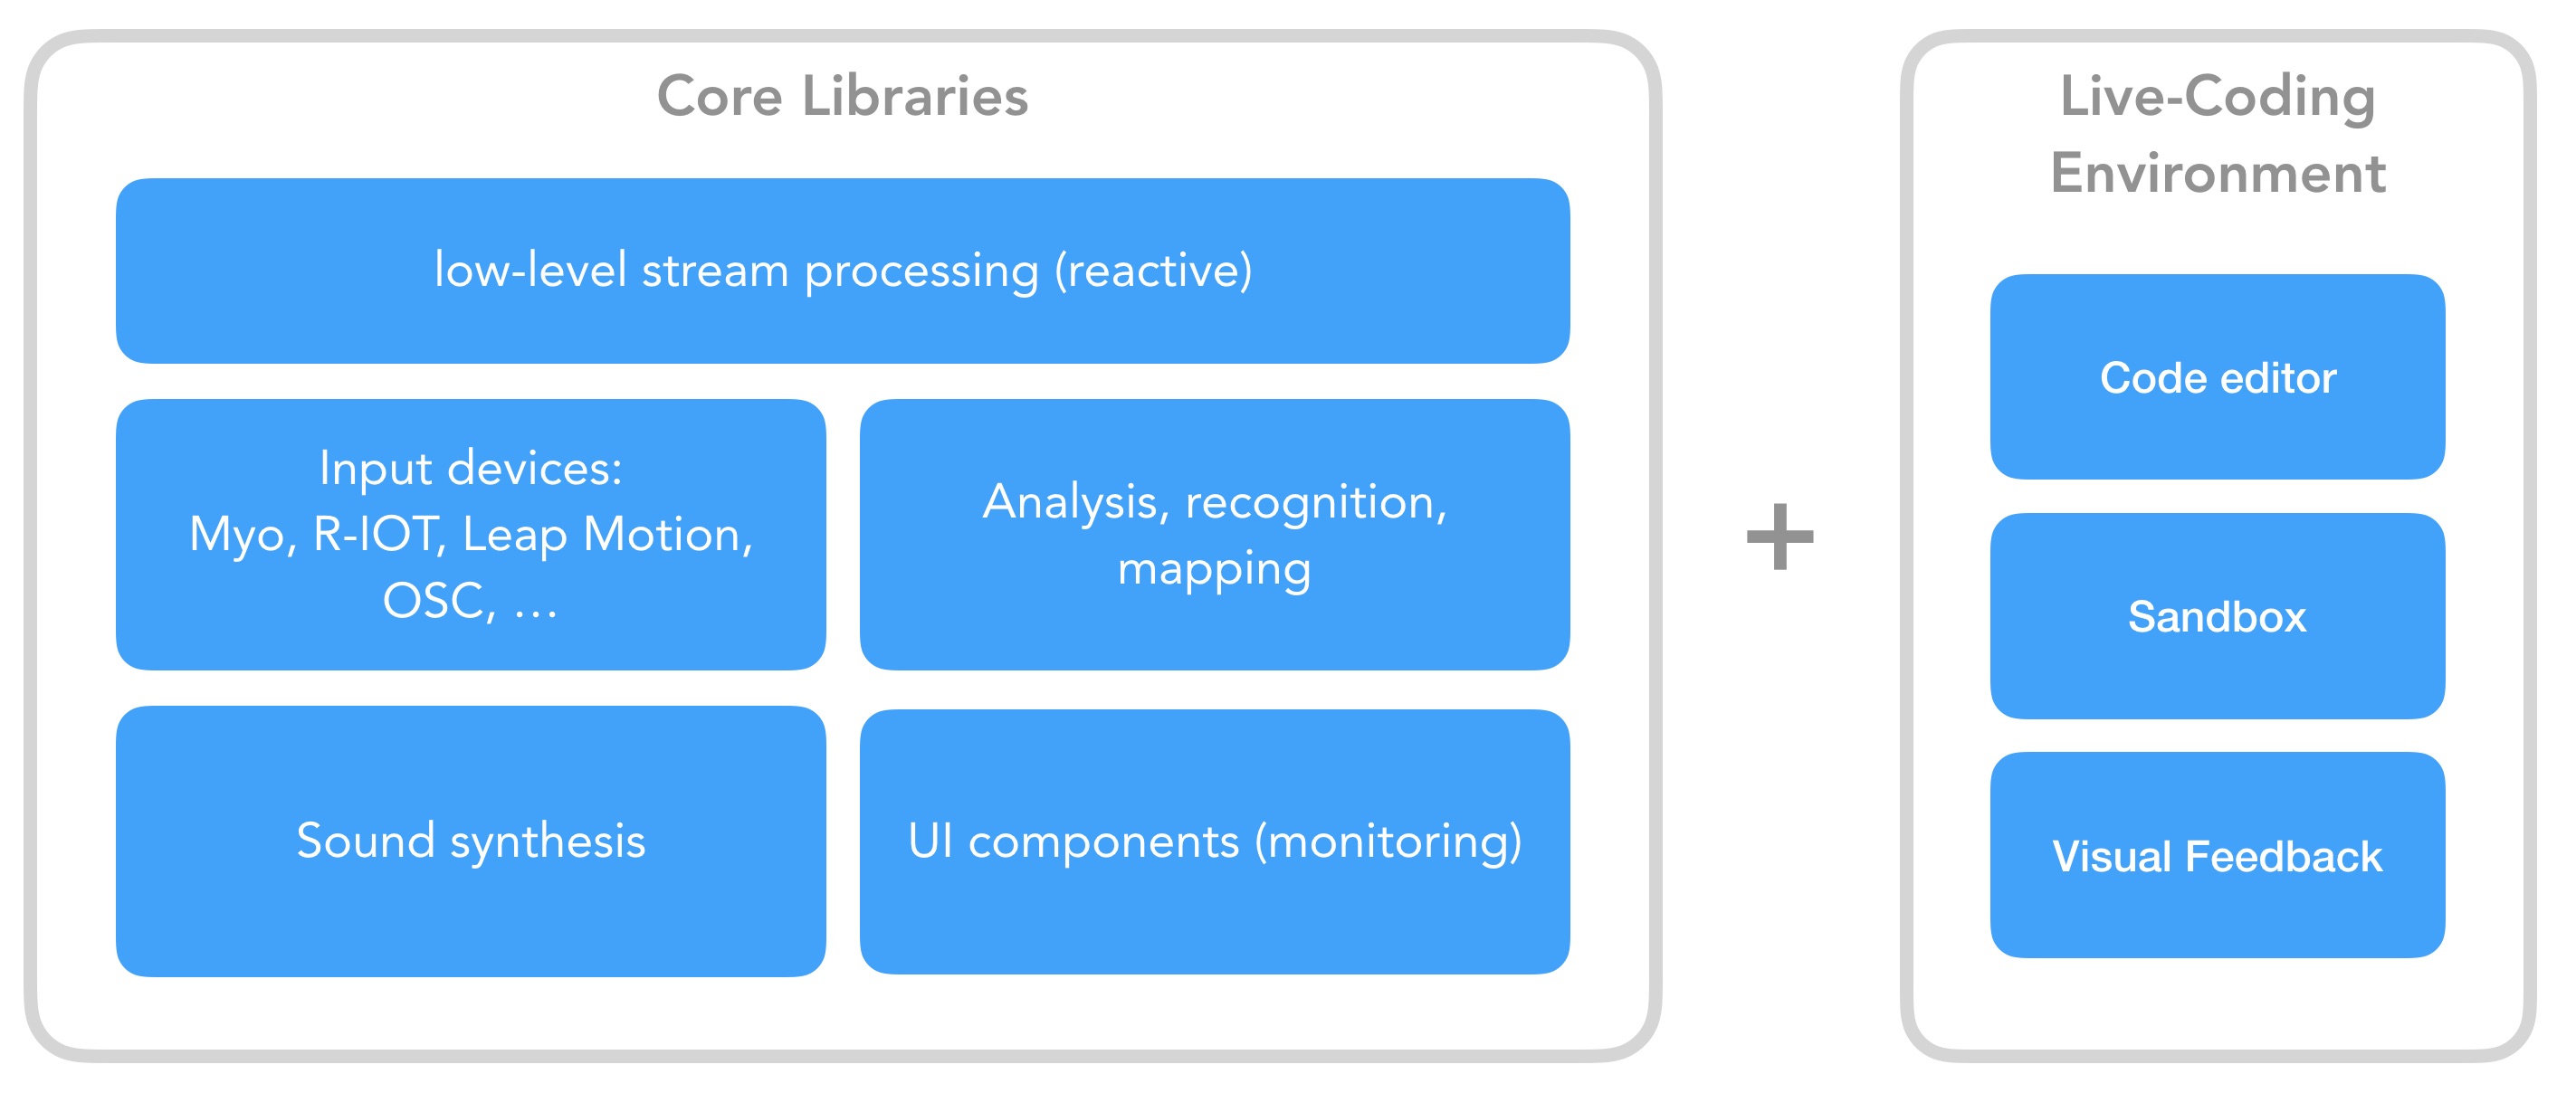 Visual overview of the coda.js library architecture